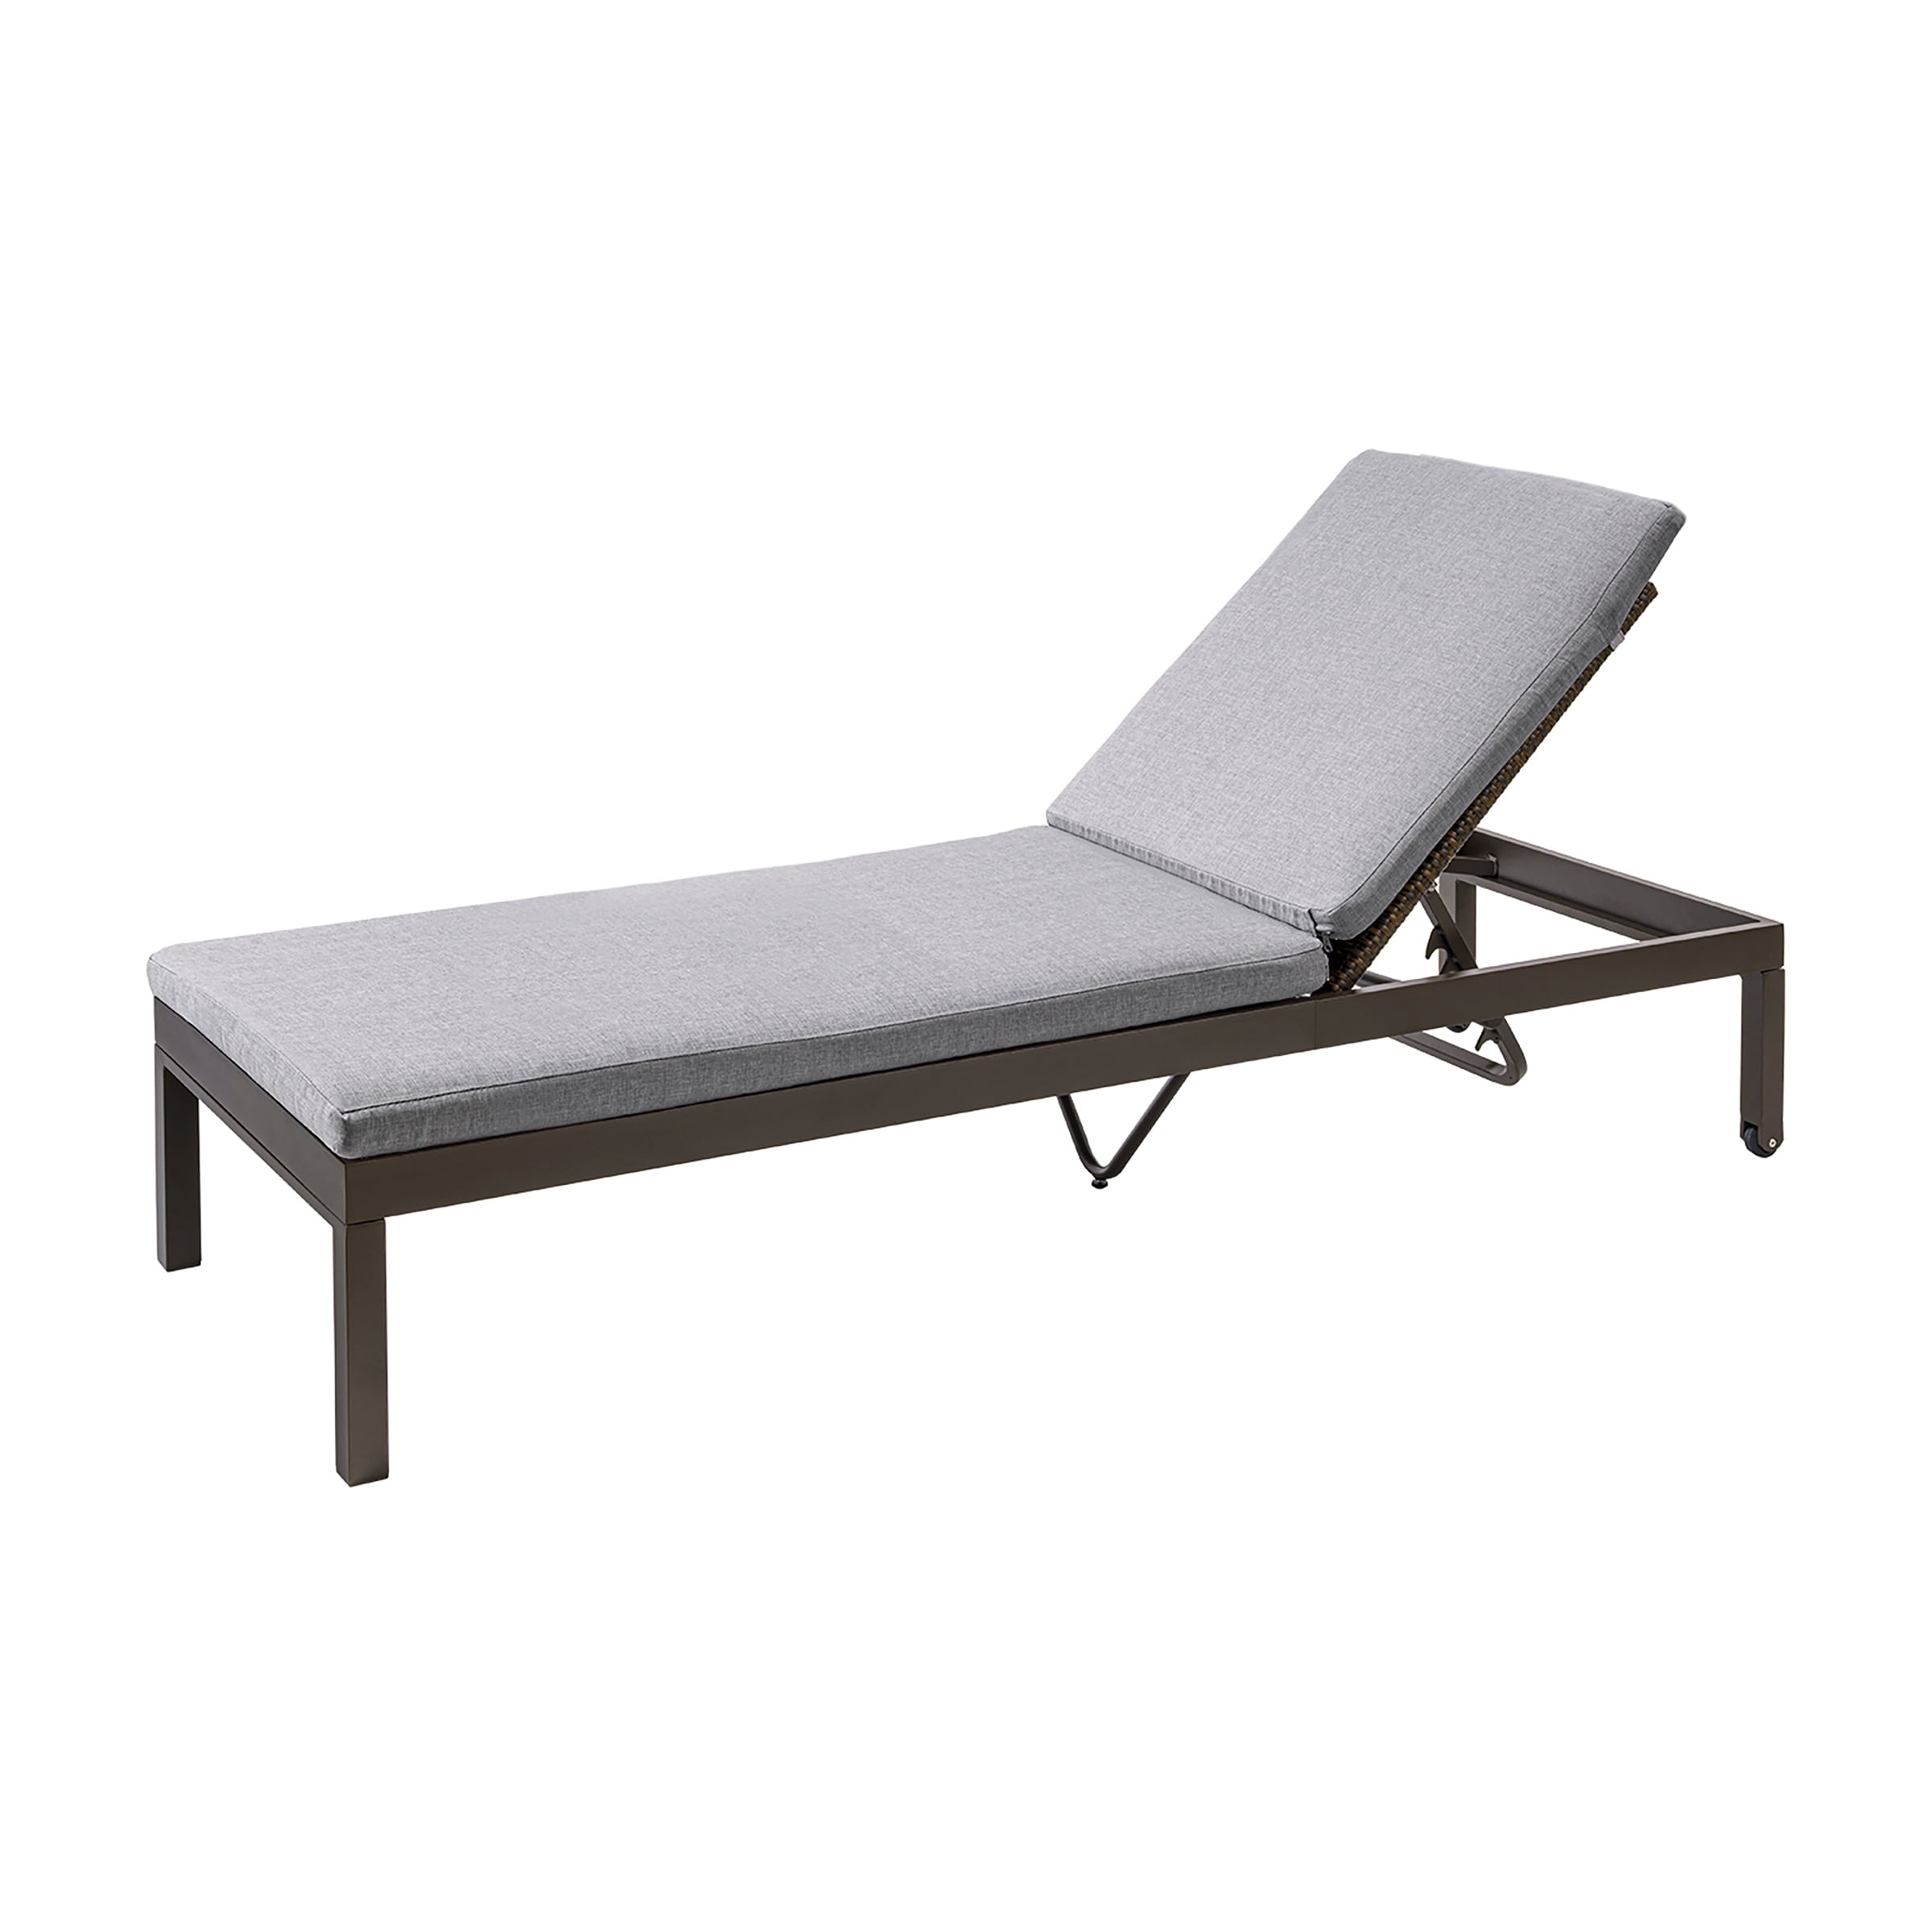 ego Illustreren inflatie Outdoor Cushioned Wicker Chaise Lounge by Pellebant - See the product  picture - Overstock - 36065467